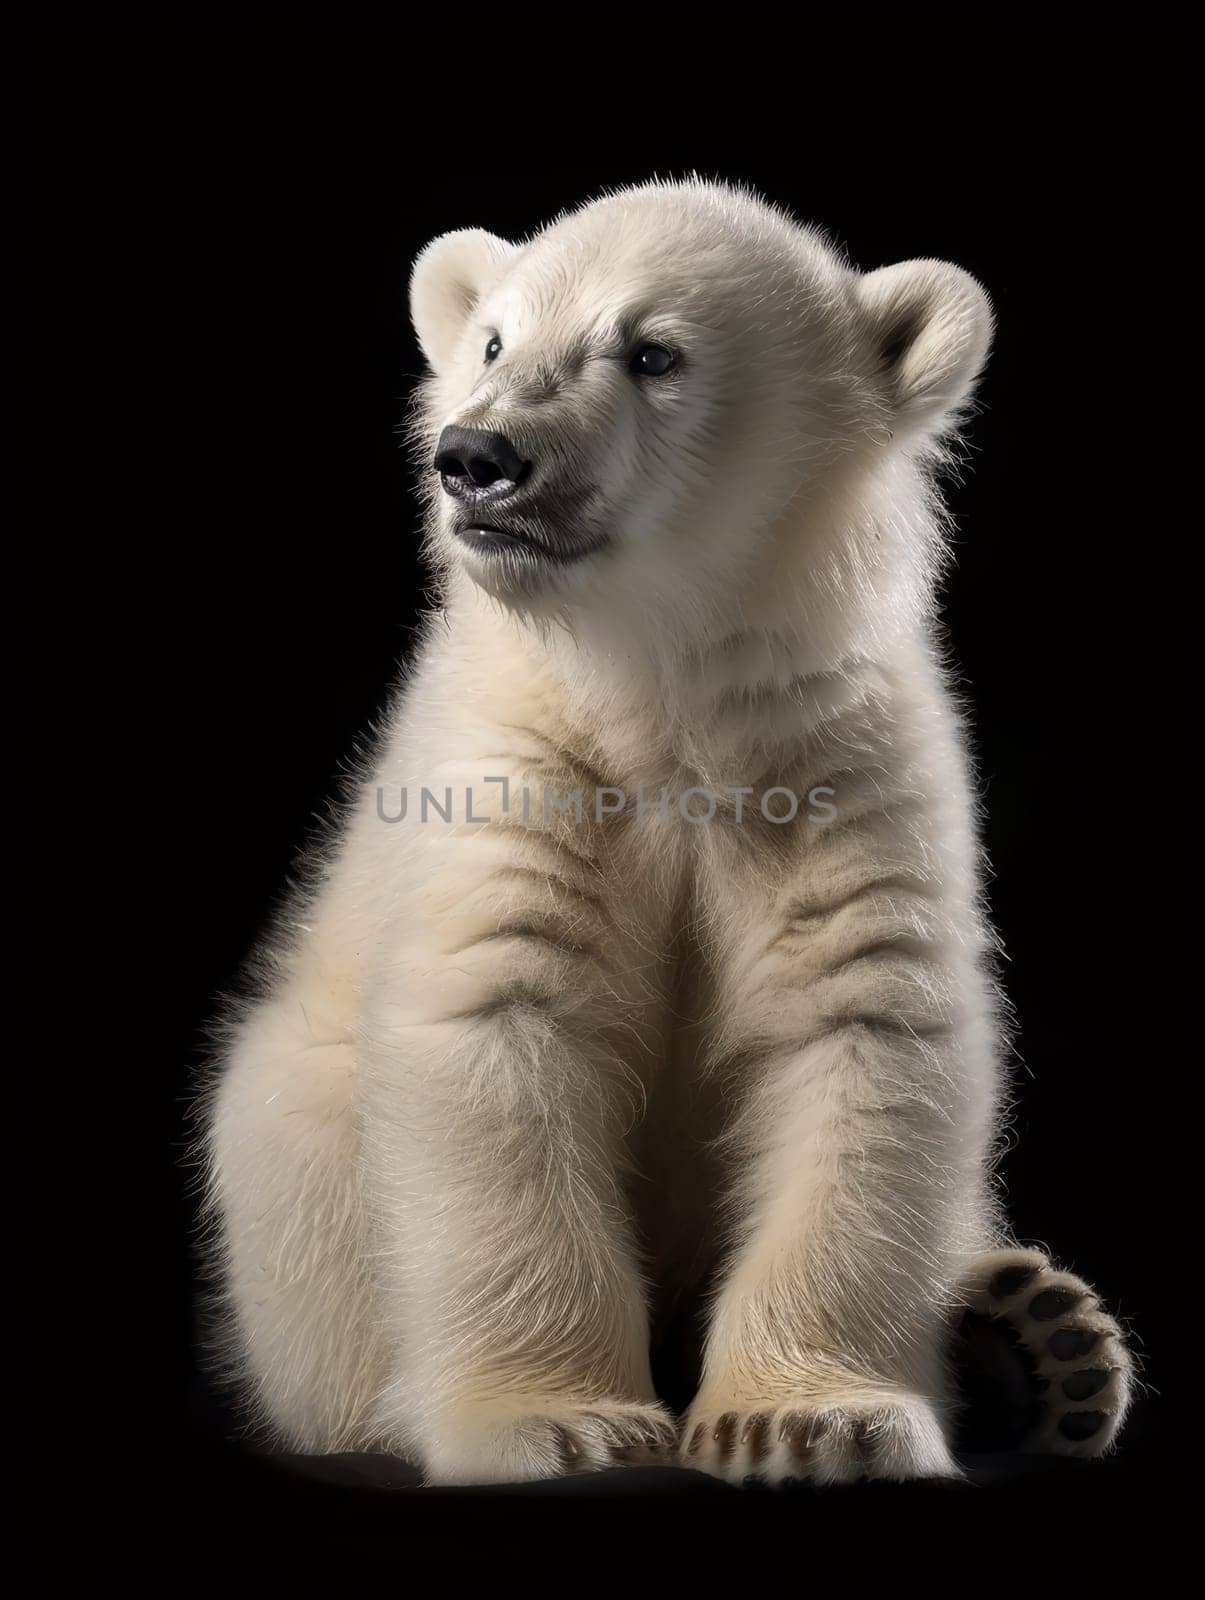 A polar bear cub sits against a dark background, its white fur glowing softly as it looks curiously towards the viewer, embodying vulnerability and the need for conservation.